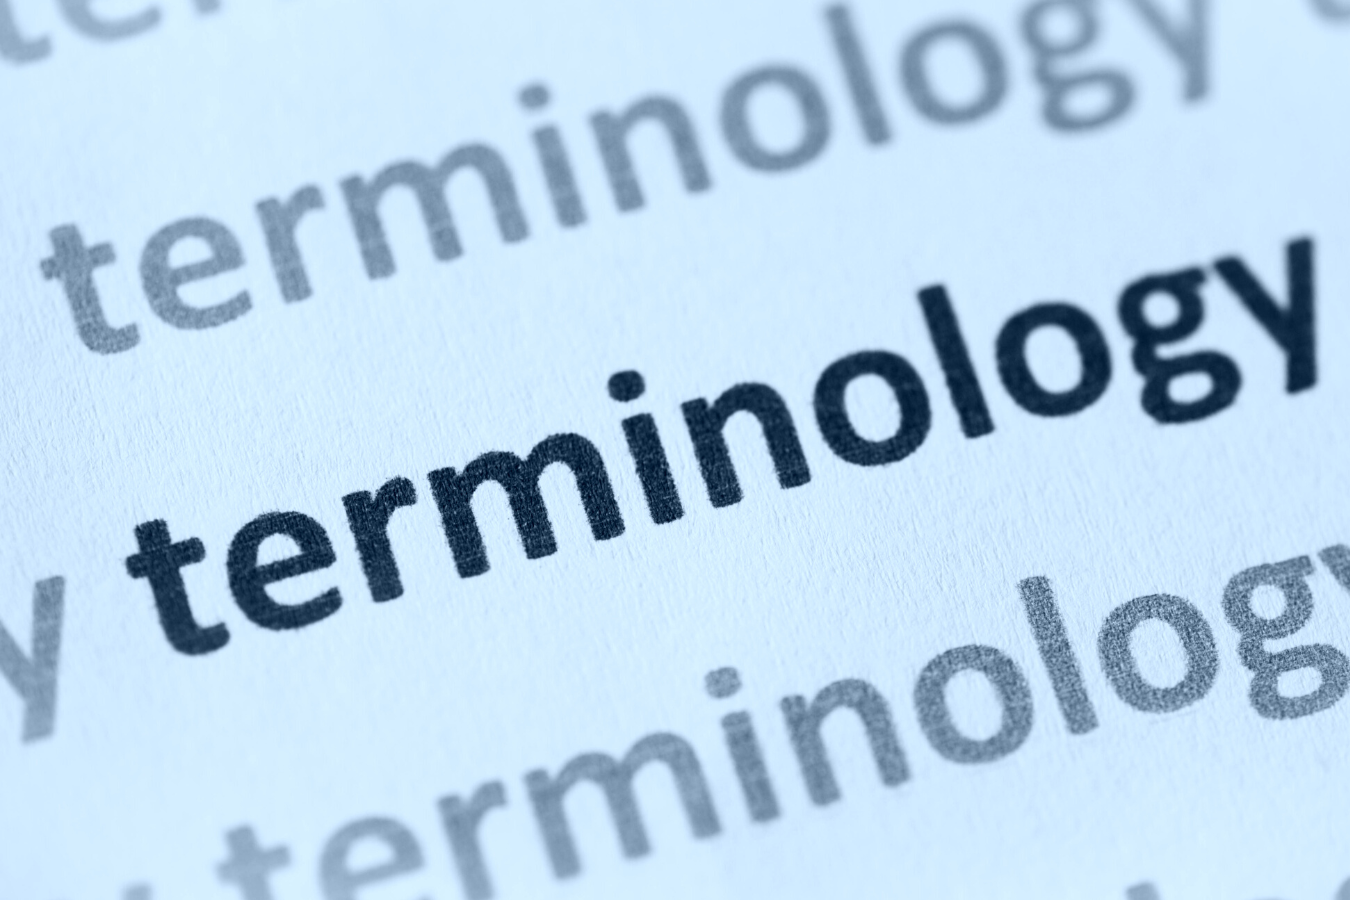 Our mineral rights terminology guide